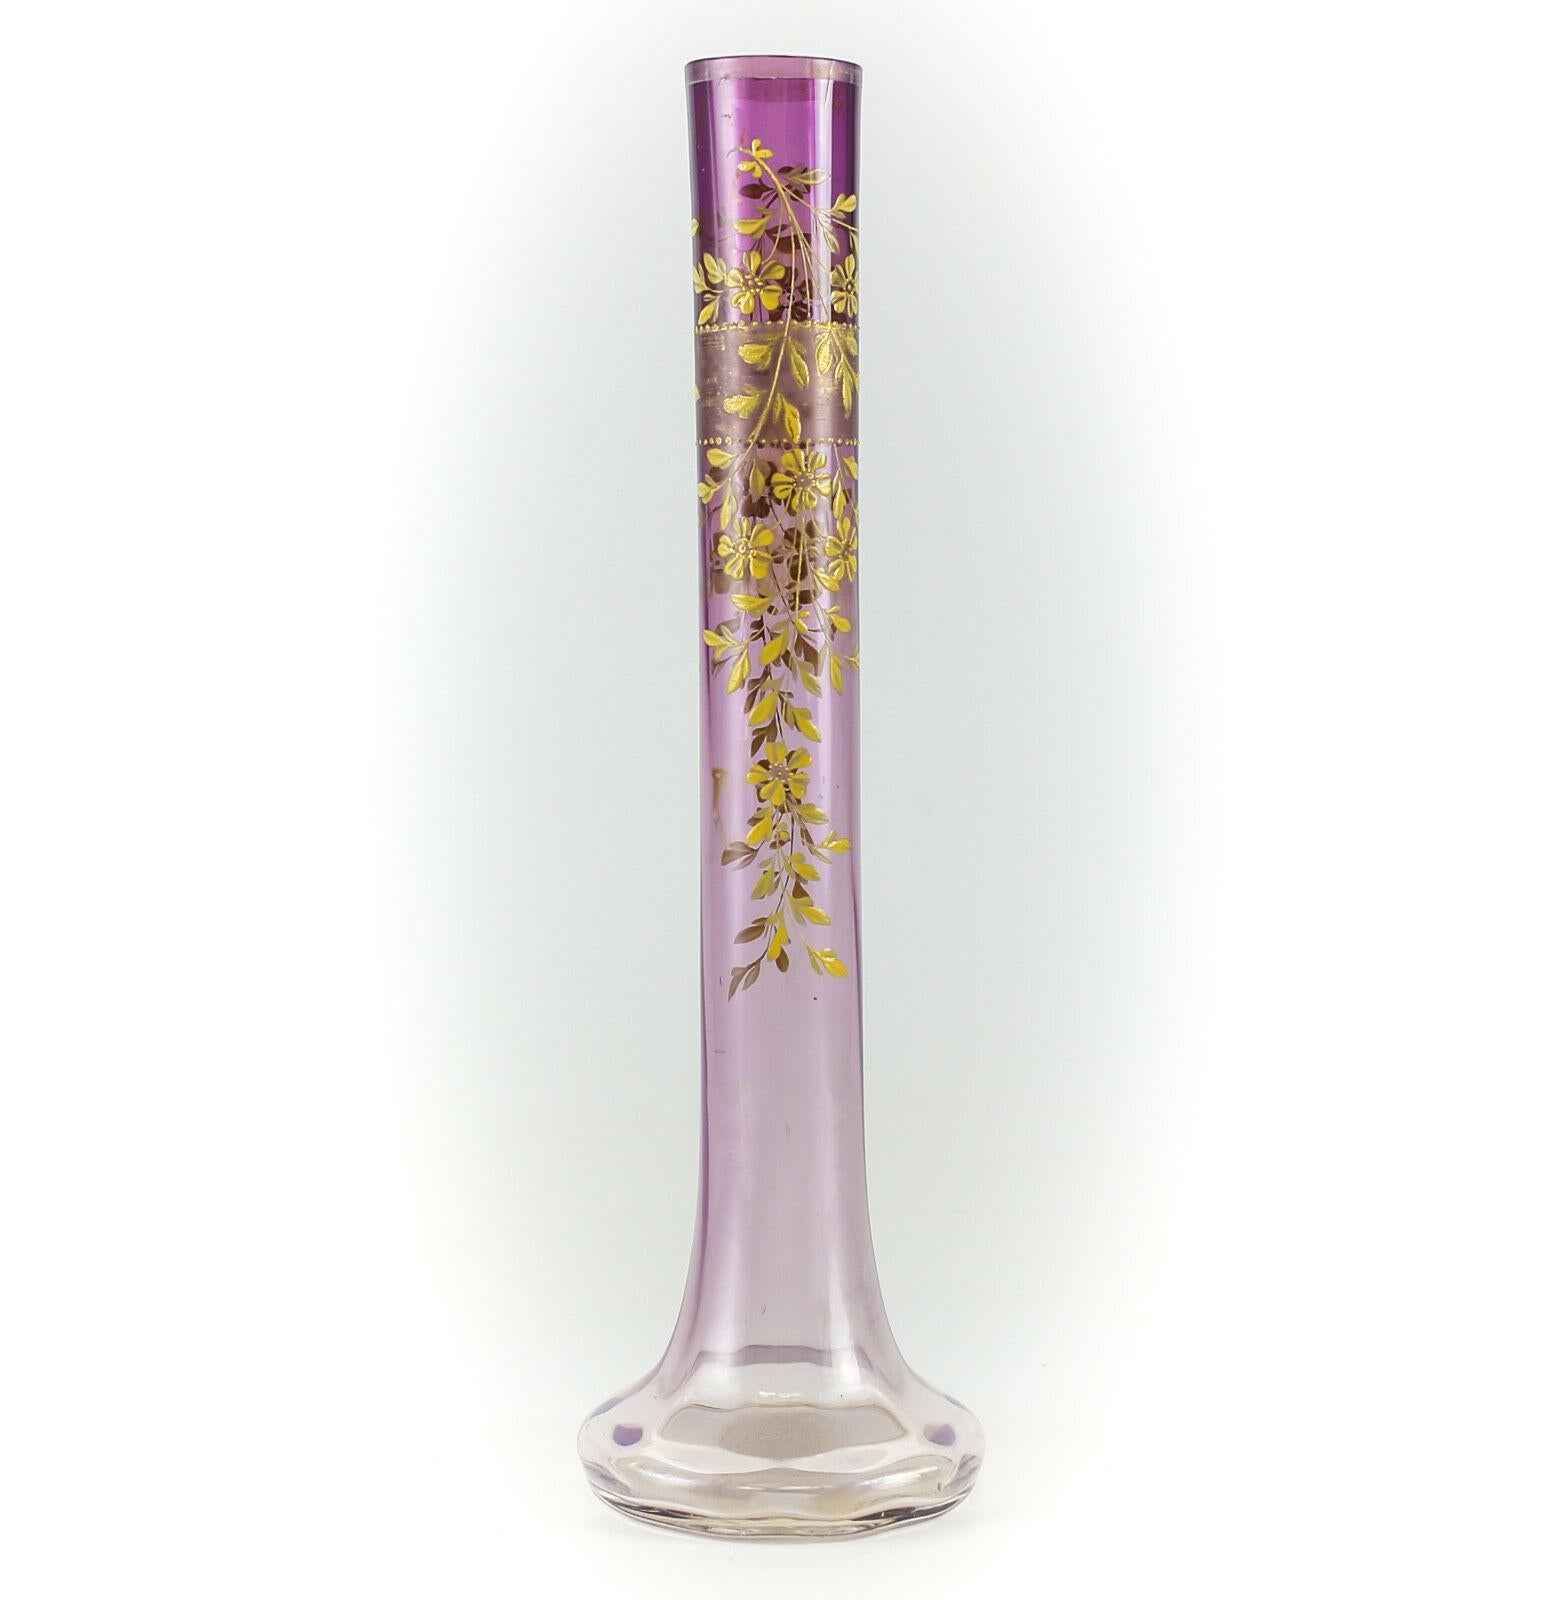 Moser Amethyst Art glass bud vase raised hand painted enamel & gilt.

Moser Vase - Lovely Amethyst colored Art Glass fades to clear. With heightened Hand painted Enamel flowers with gilt leaves. Marked 'Moser' on underside in gilt.

Additional